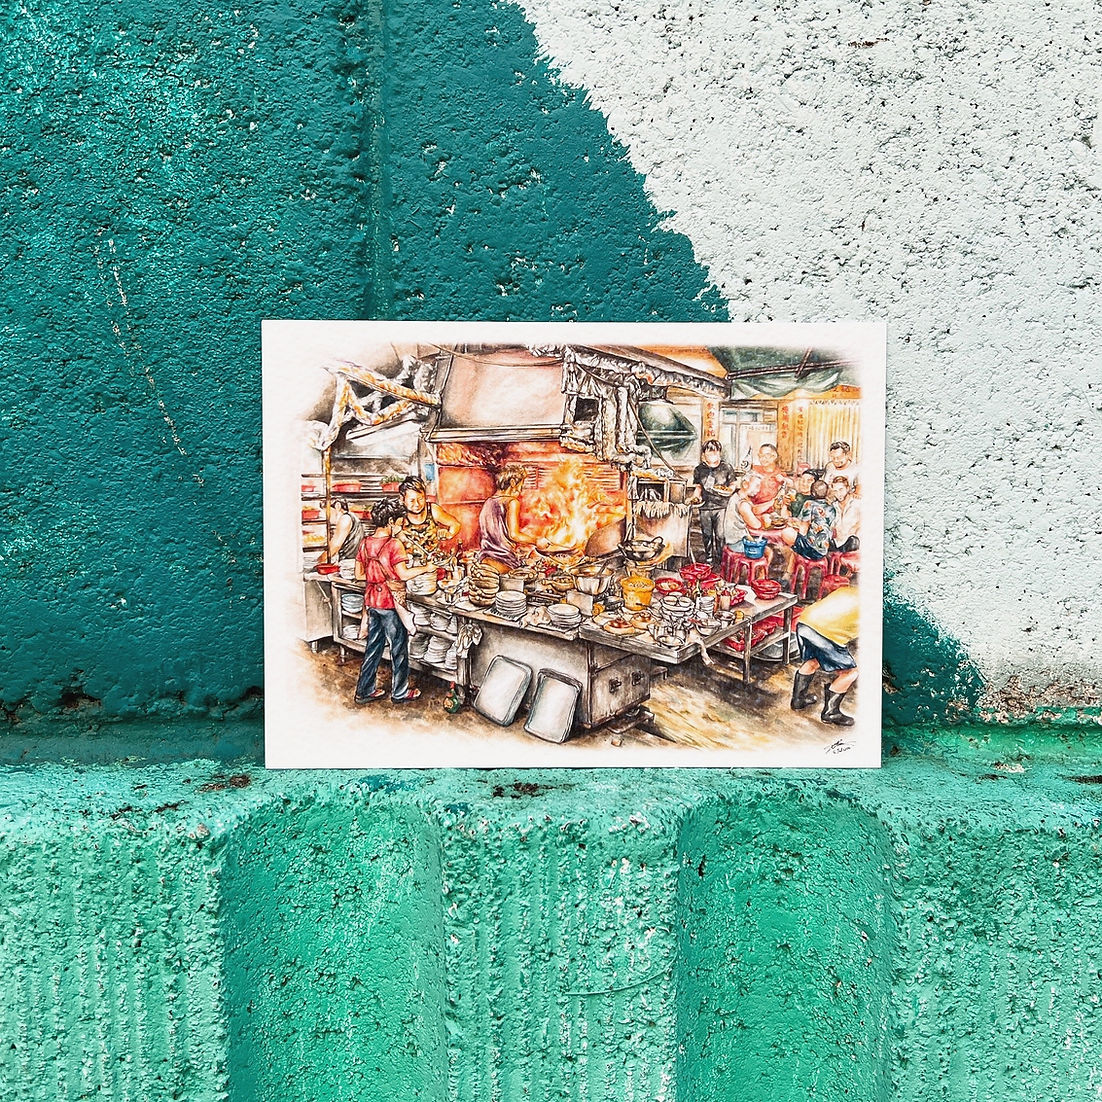 'Markets & Stalls' Postcard Set of 6 by Alvin Lam